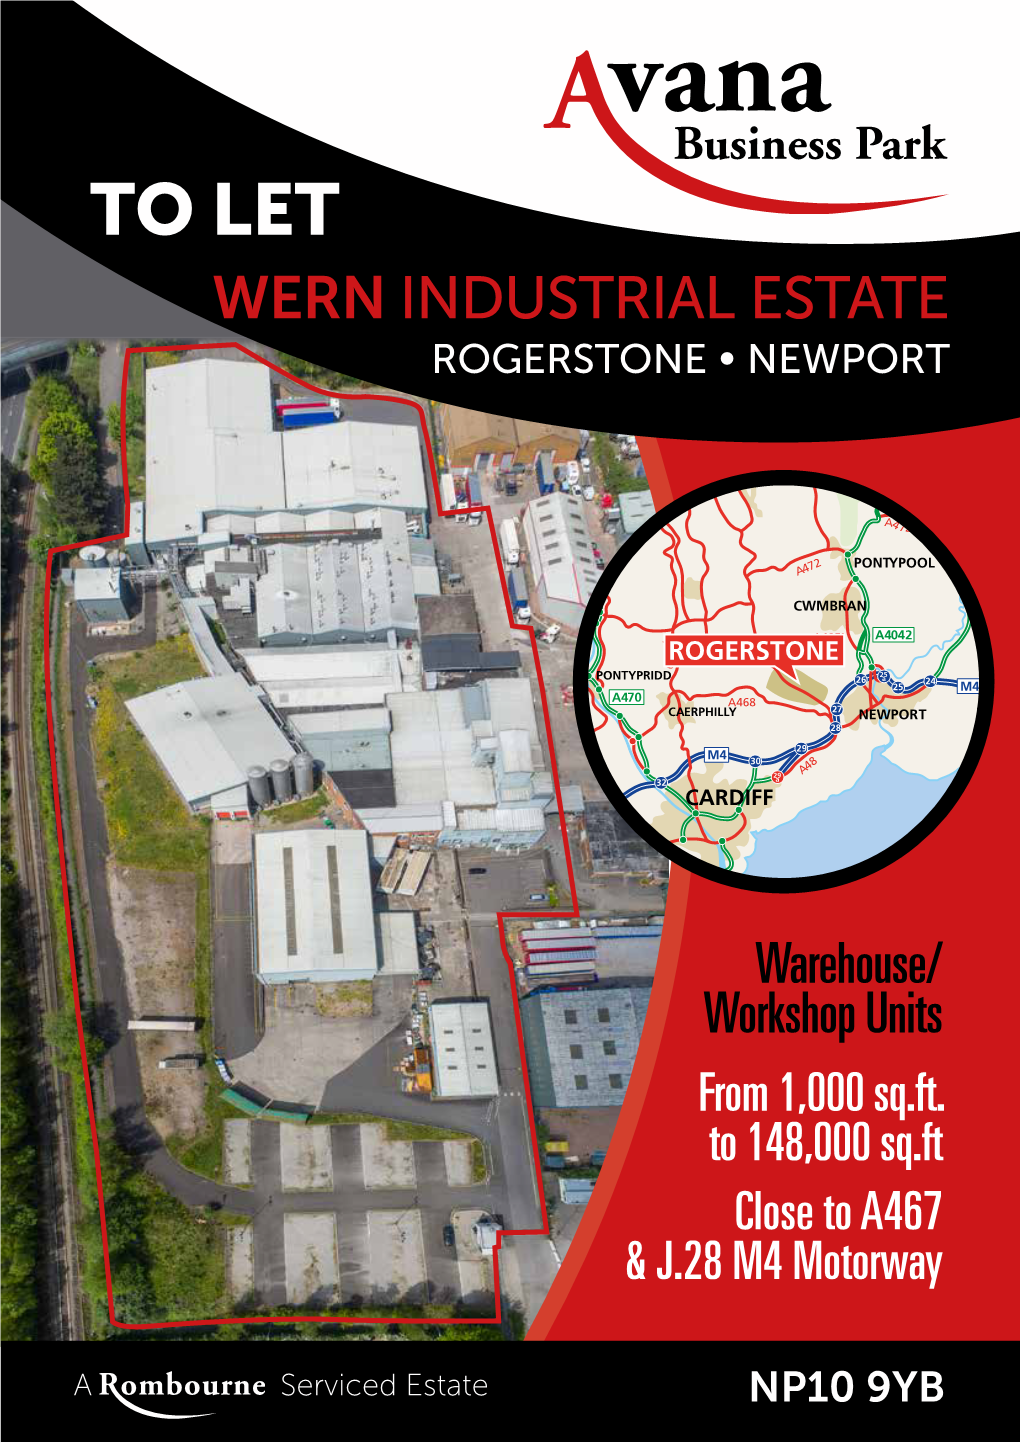 Avana Business Park, Wern Industrial Estate (NP10 9YB) Is Located Approximately 2.5 Miles North West of Newport City Centre